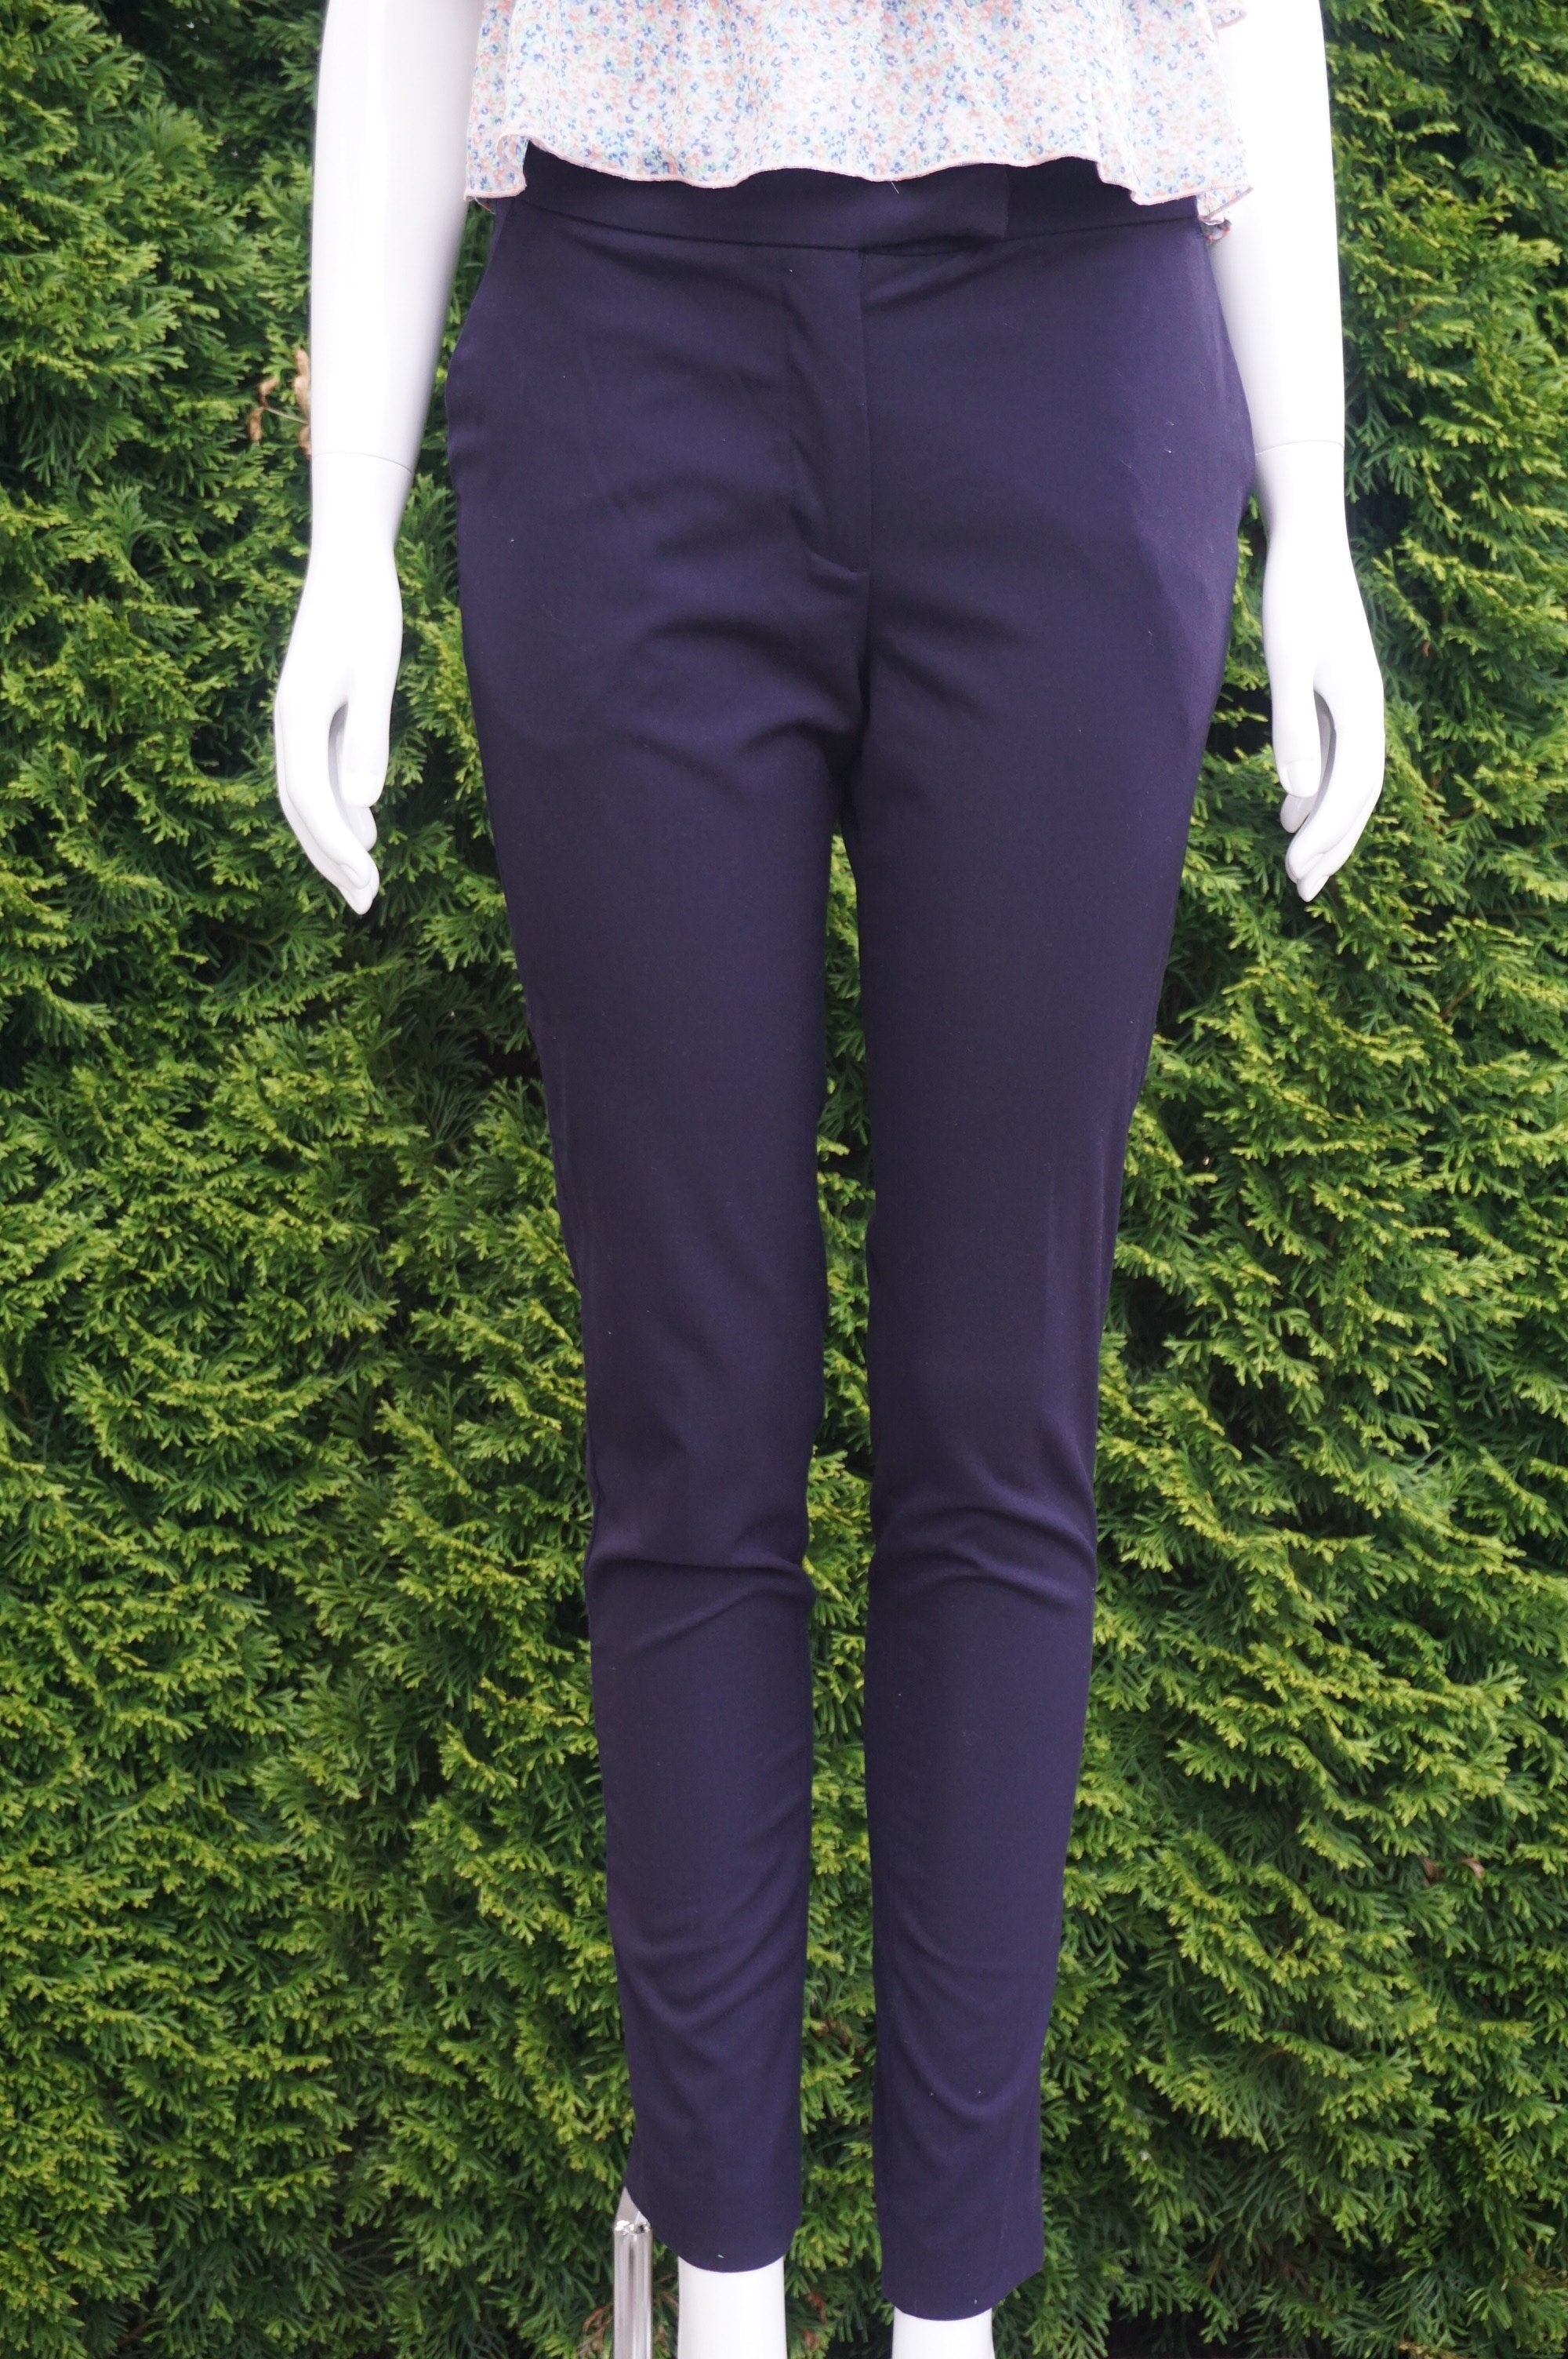 H&M Dark Blue Dress Pants, Waist measures 29 inches, length 38 inches, inseam 29 inches., Blue, 63% Polyester, 33% viscose, 4% Elastane, women's Pants, women's Blue Pants, H&M women's Pants, 